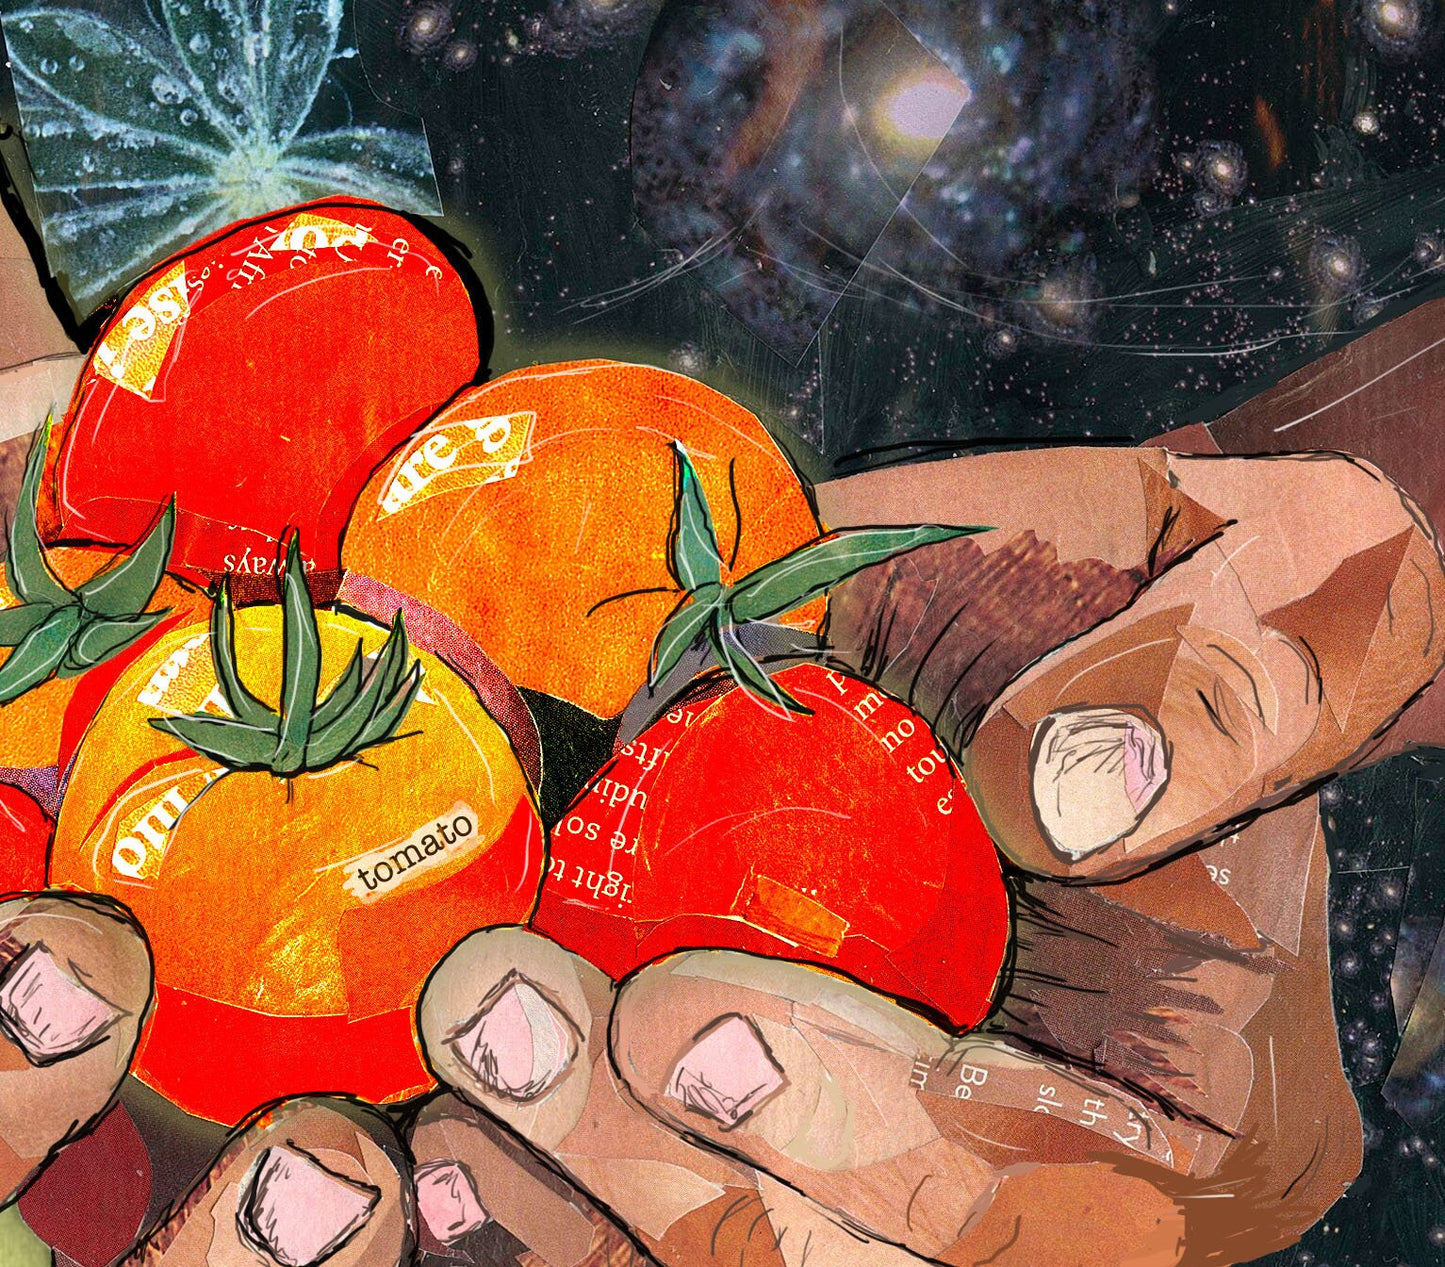 8x10 Art Print of a mixed media collage of hands holding tomatoes, garden, farming